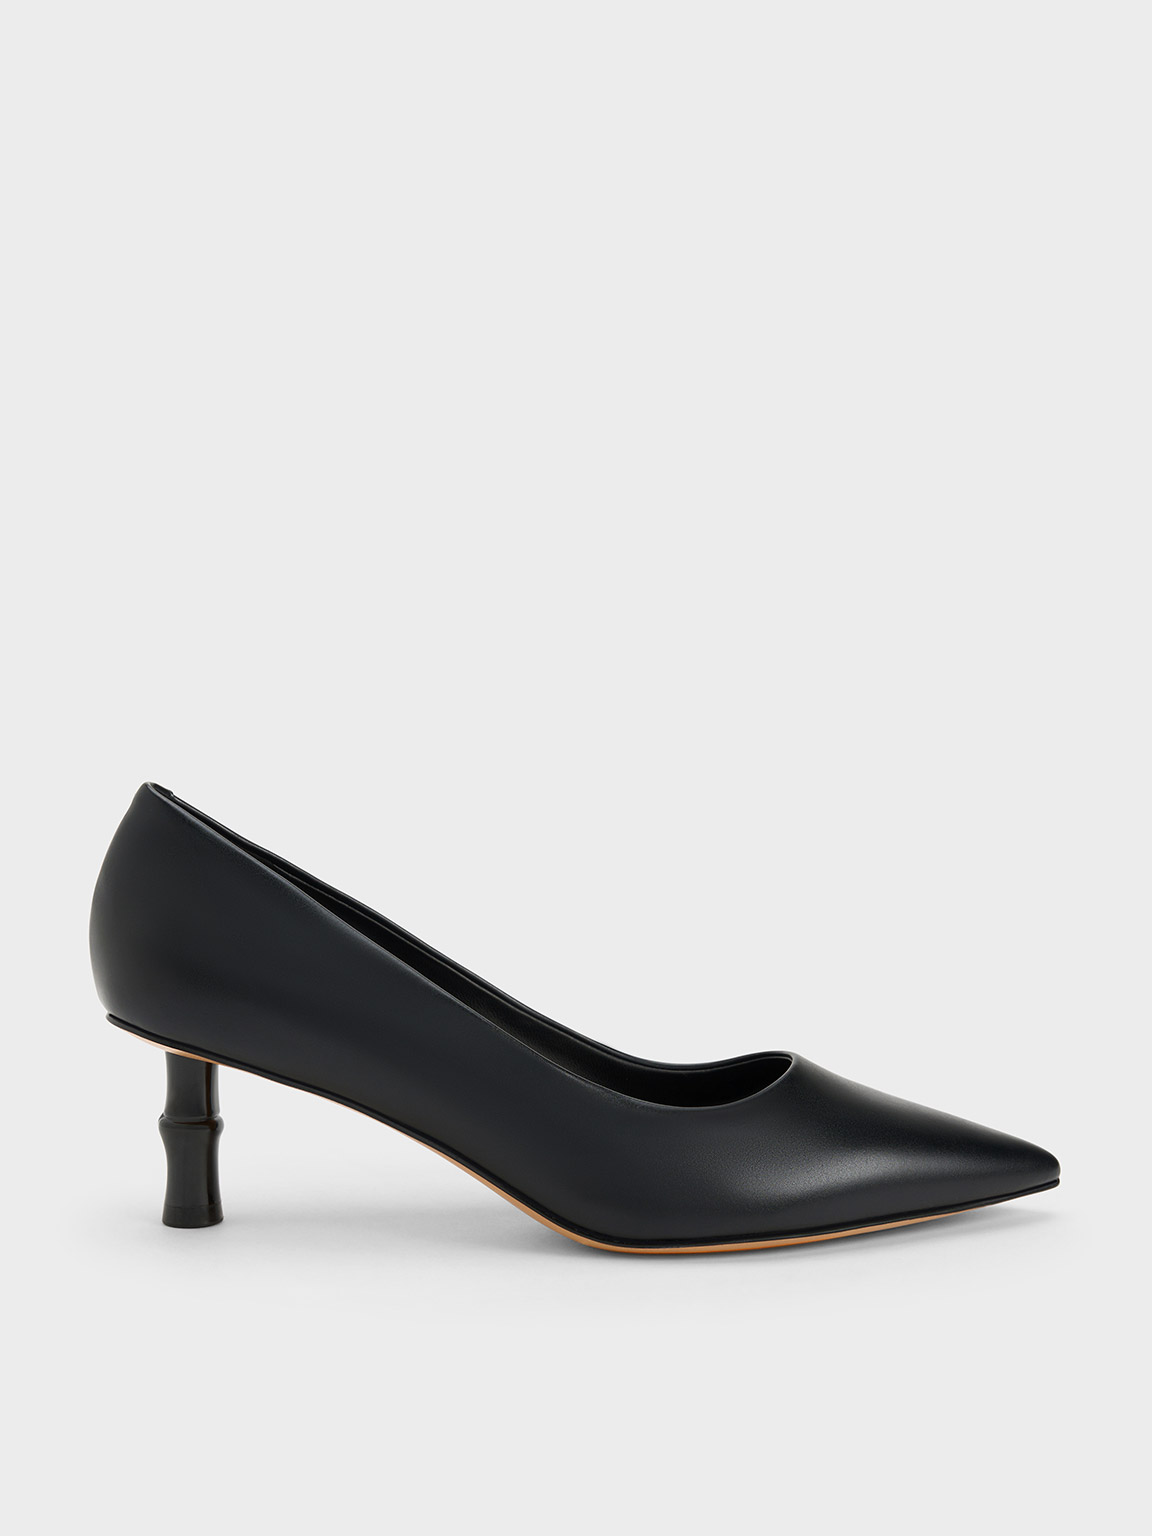 Blue Classic Pointed Pumps, CHARLES & KEITH